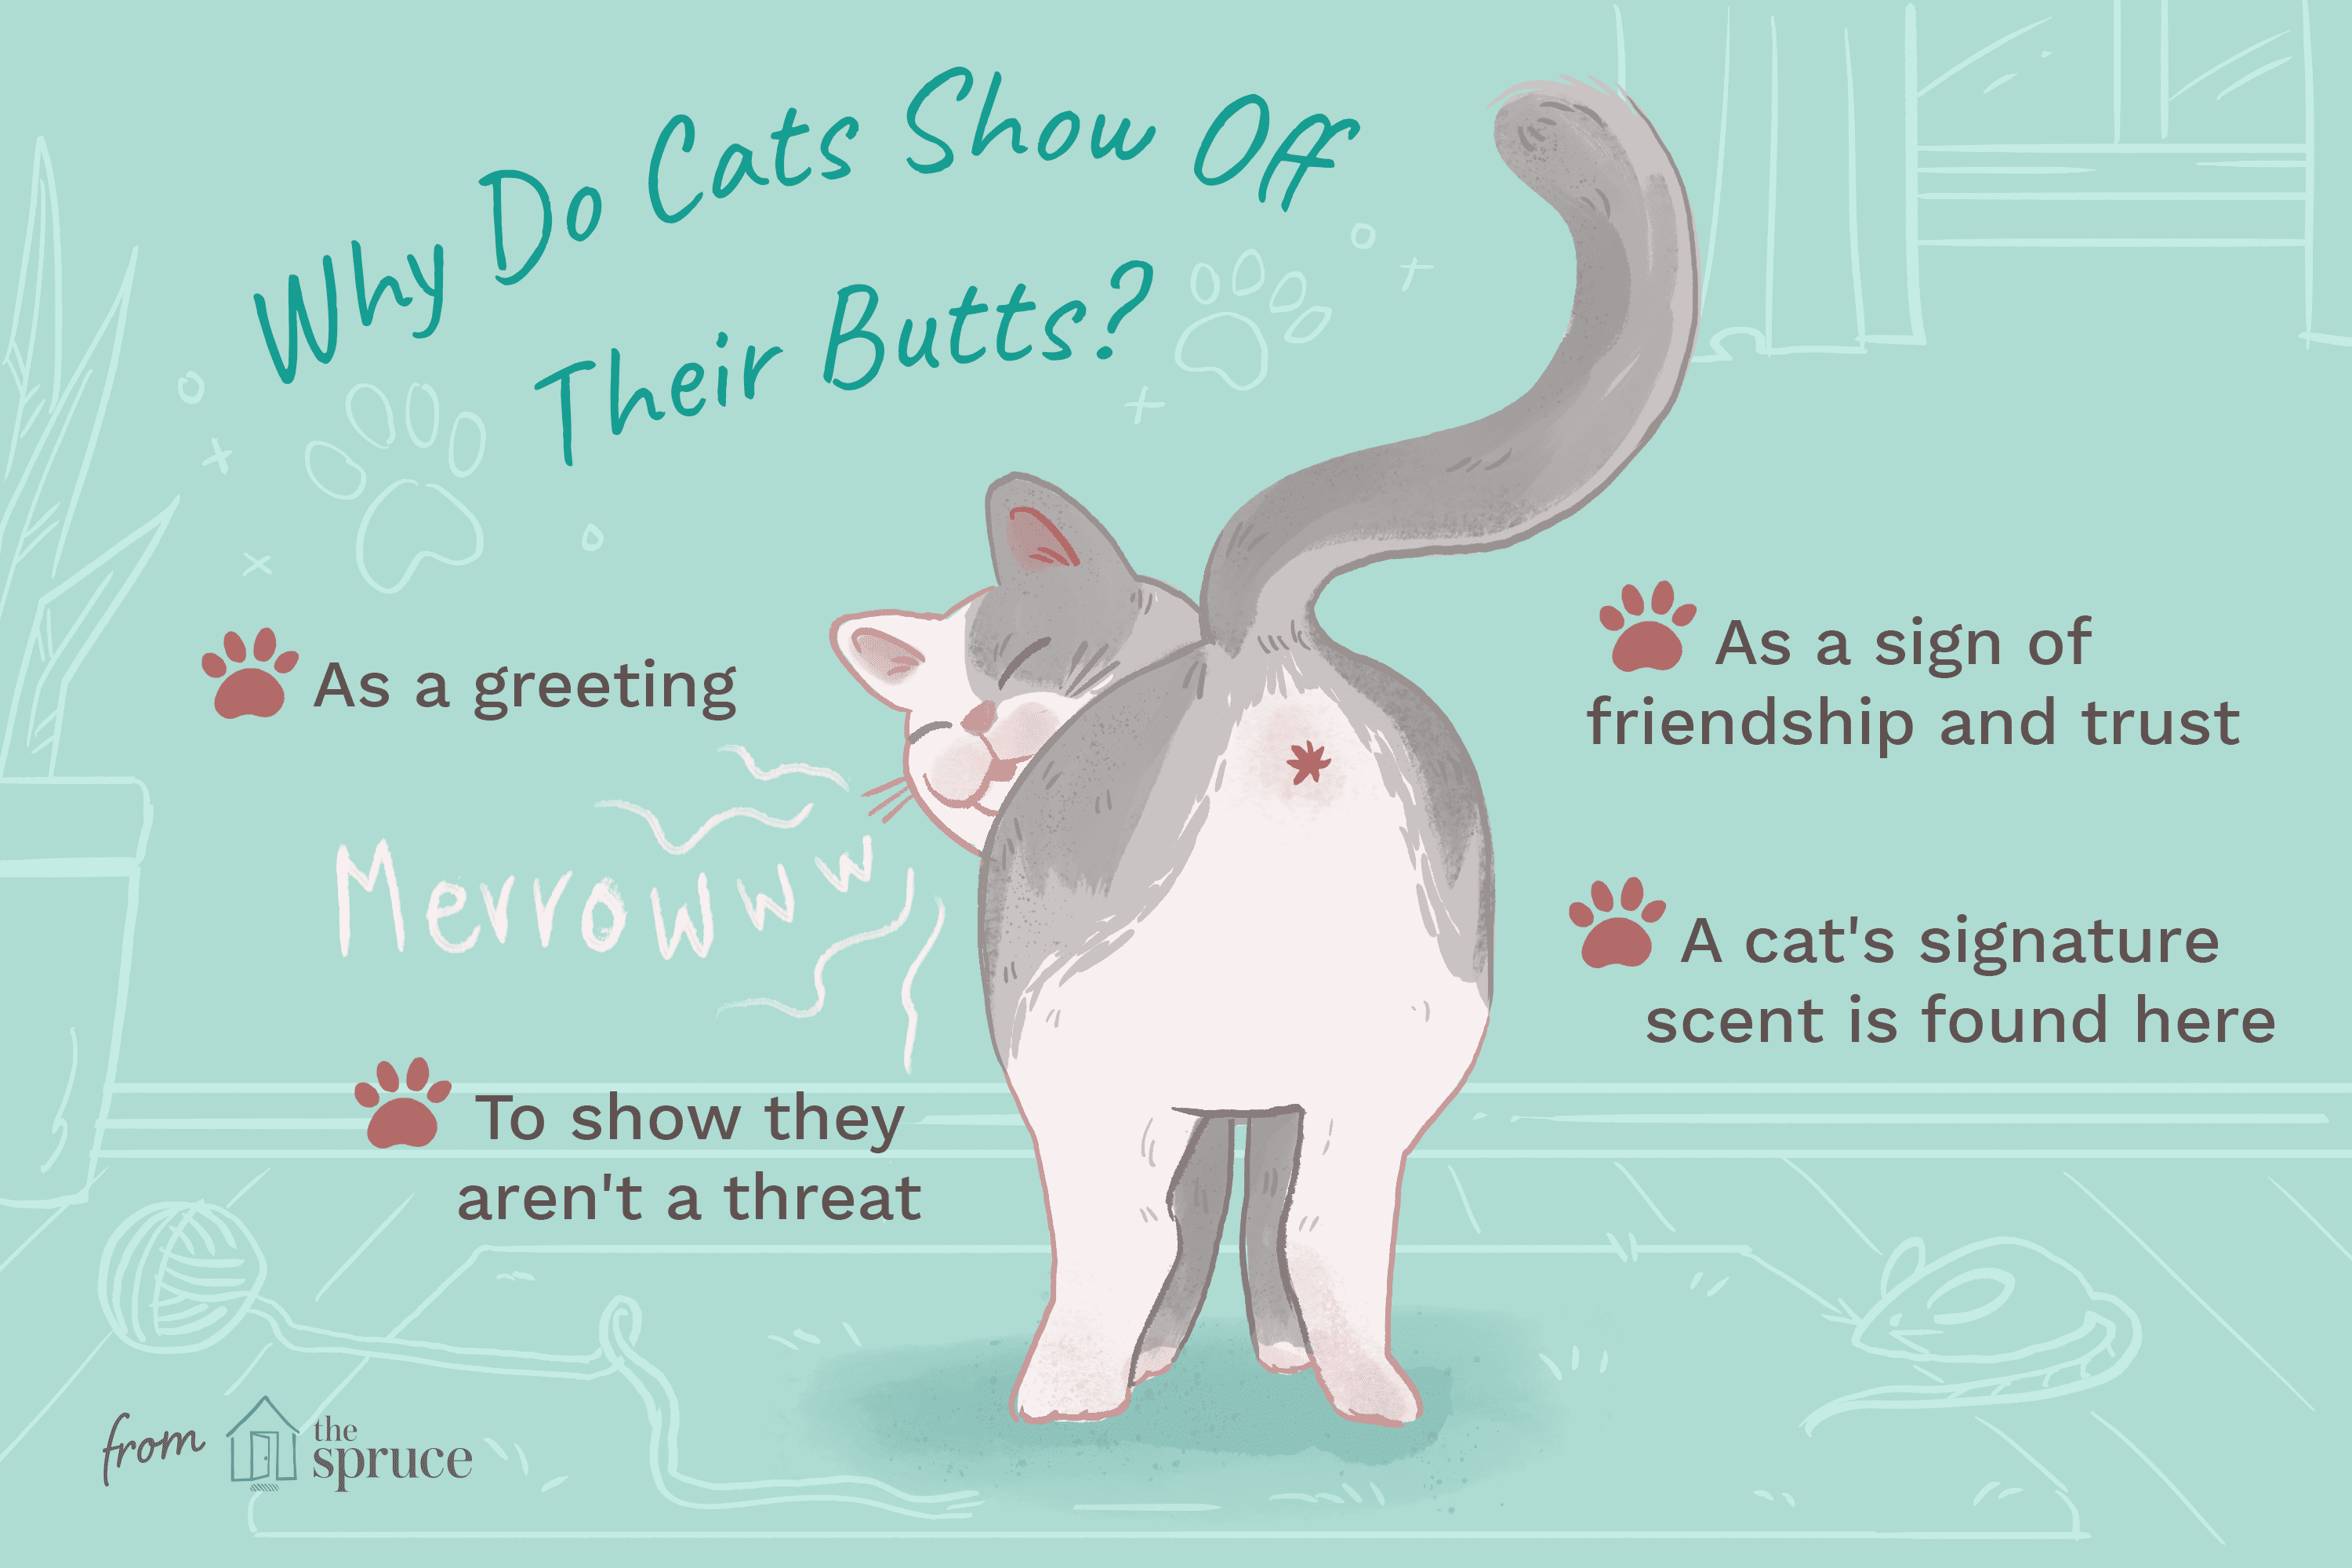 Why Do Cats Show Their Butts?